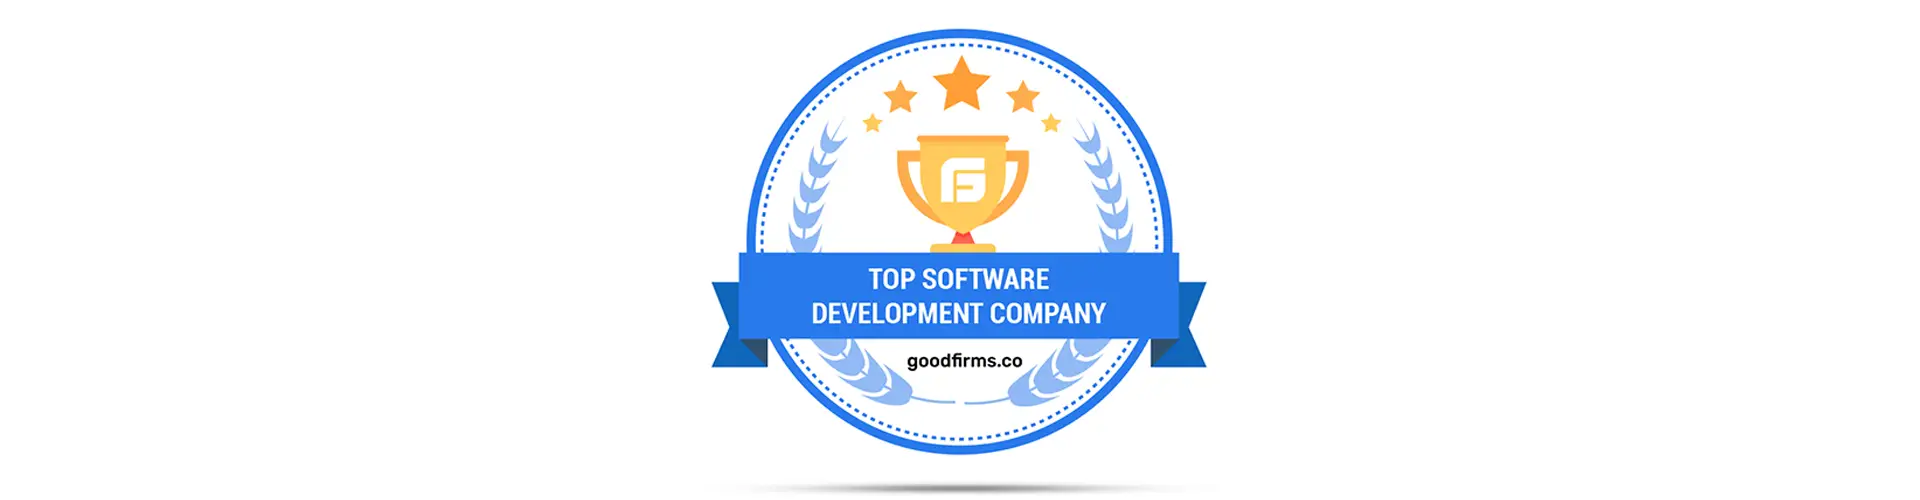 Top Software Development Company at GoodFirms.